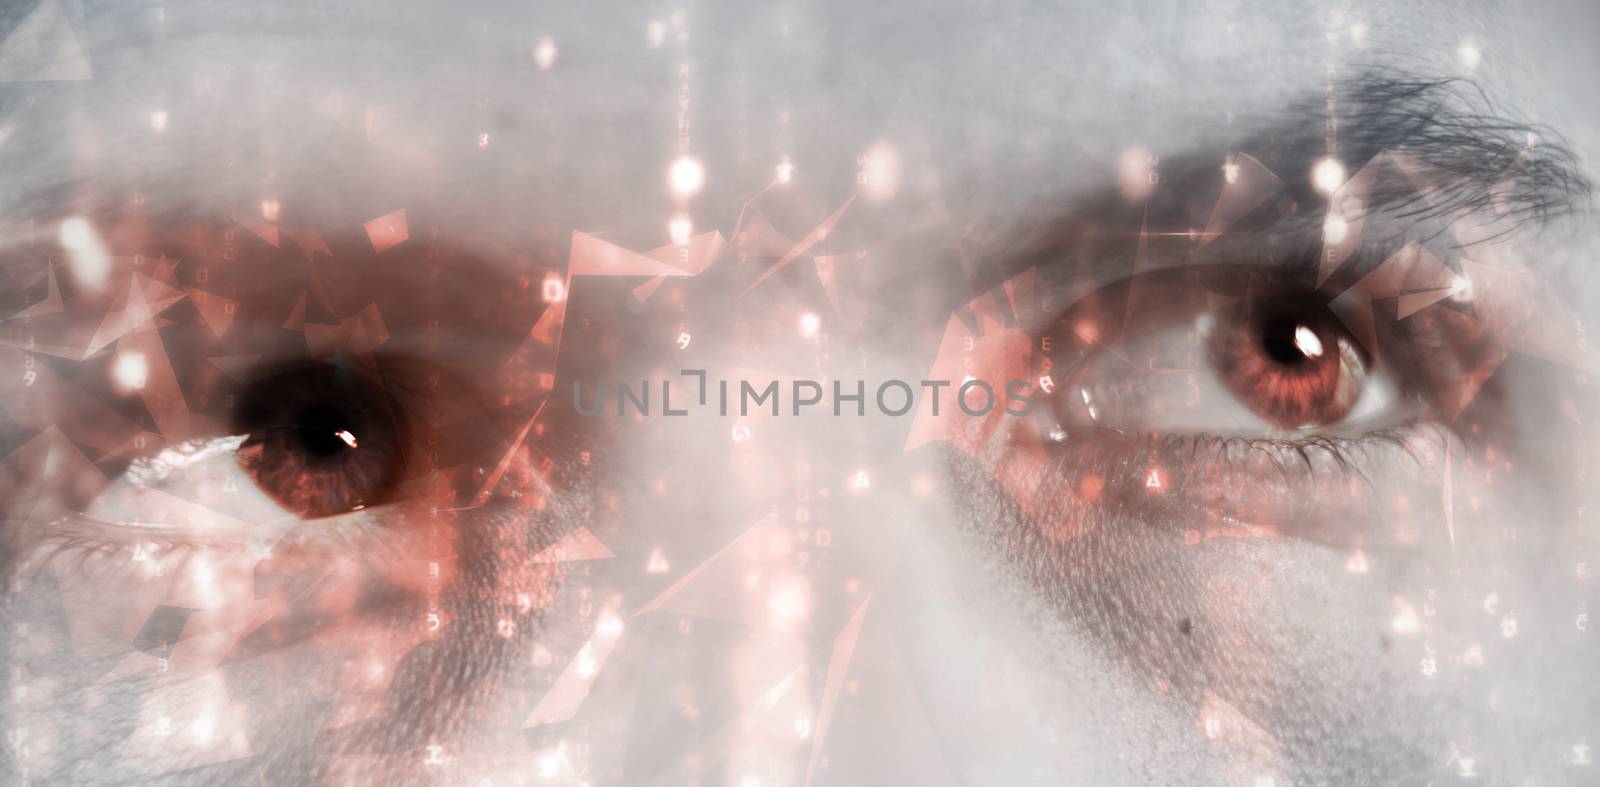 Abstract background against close up of man looking away